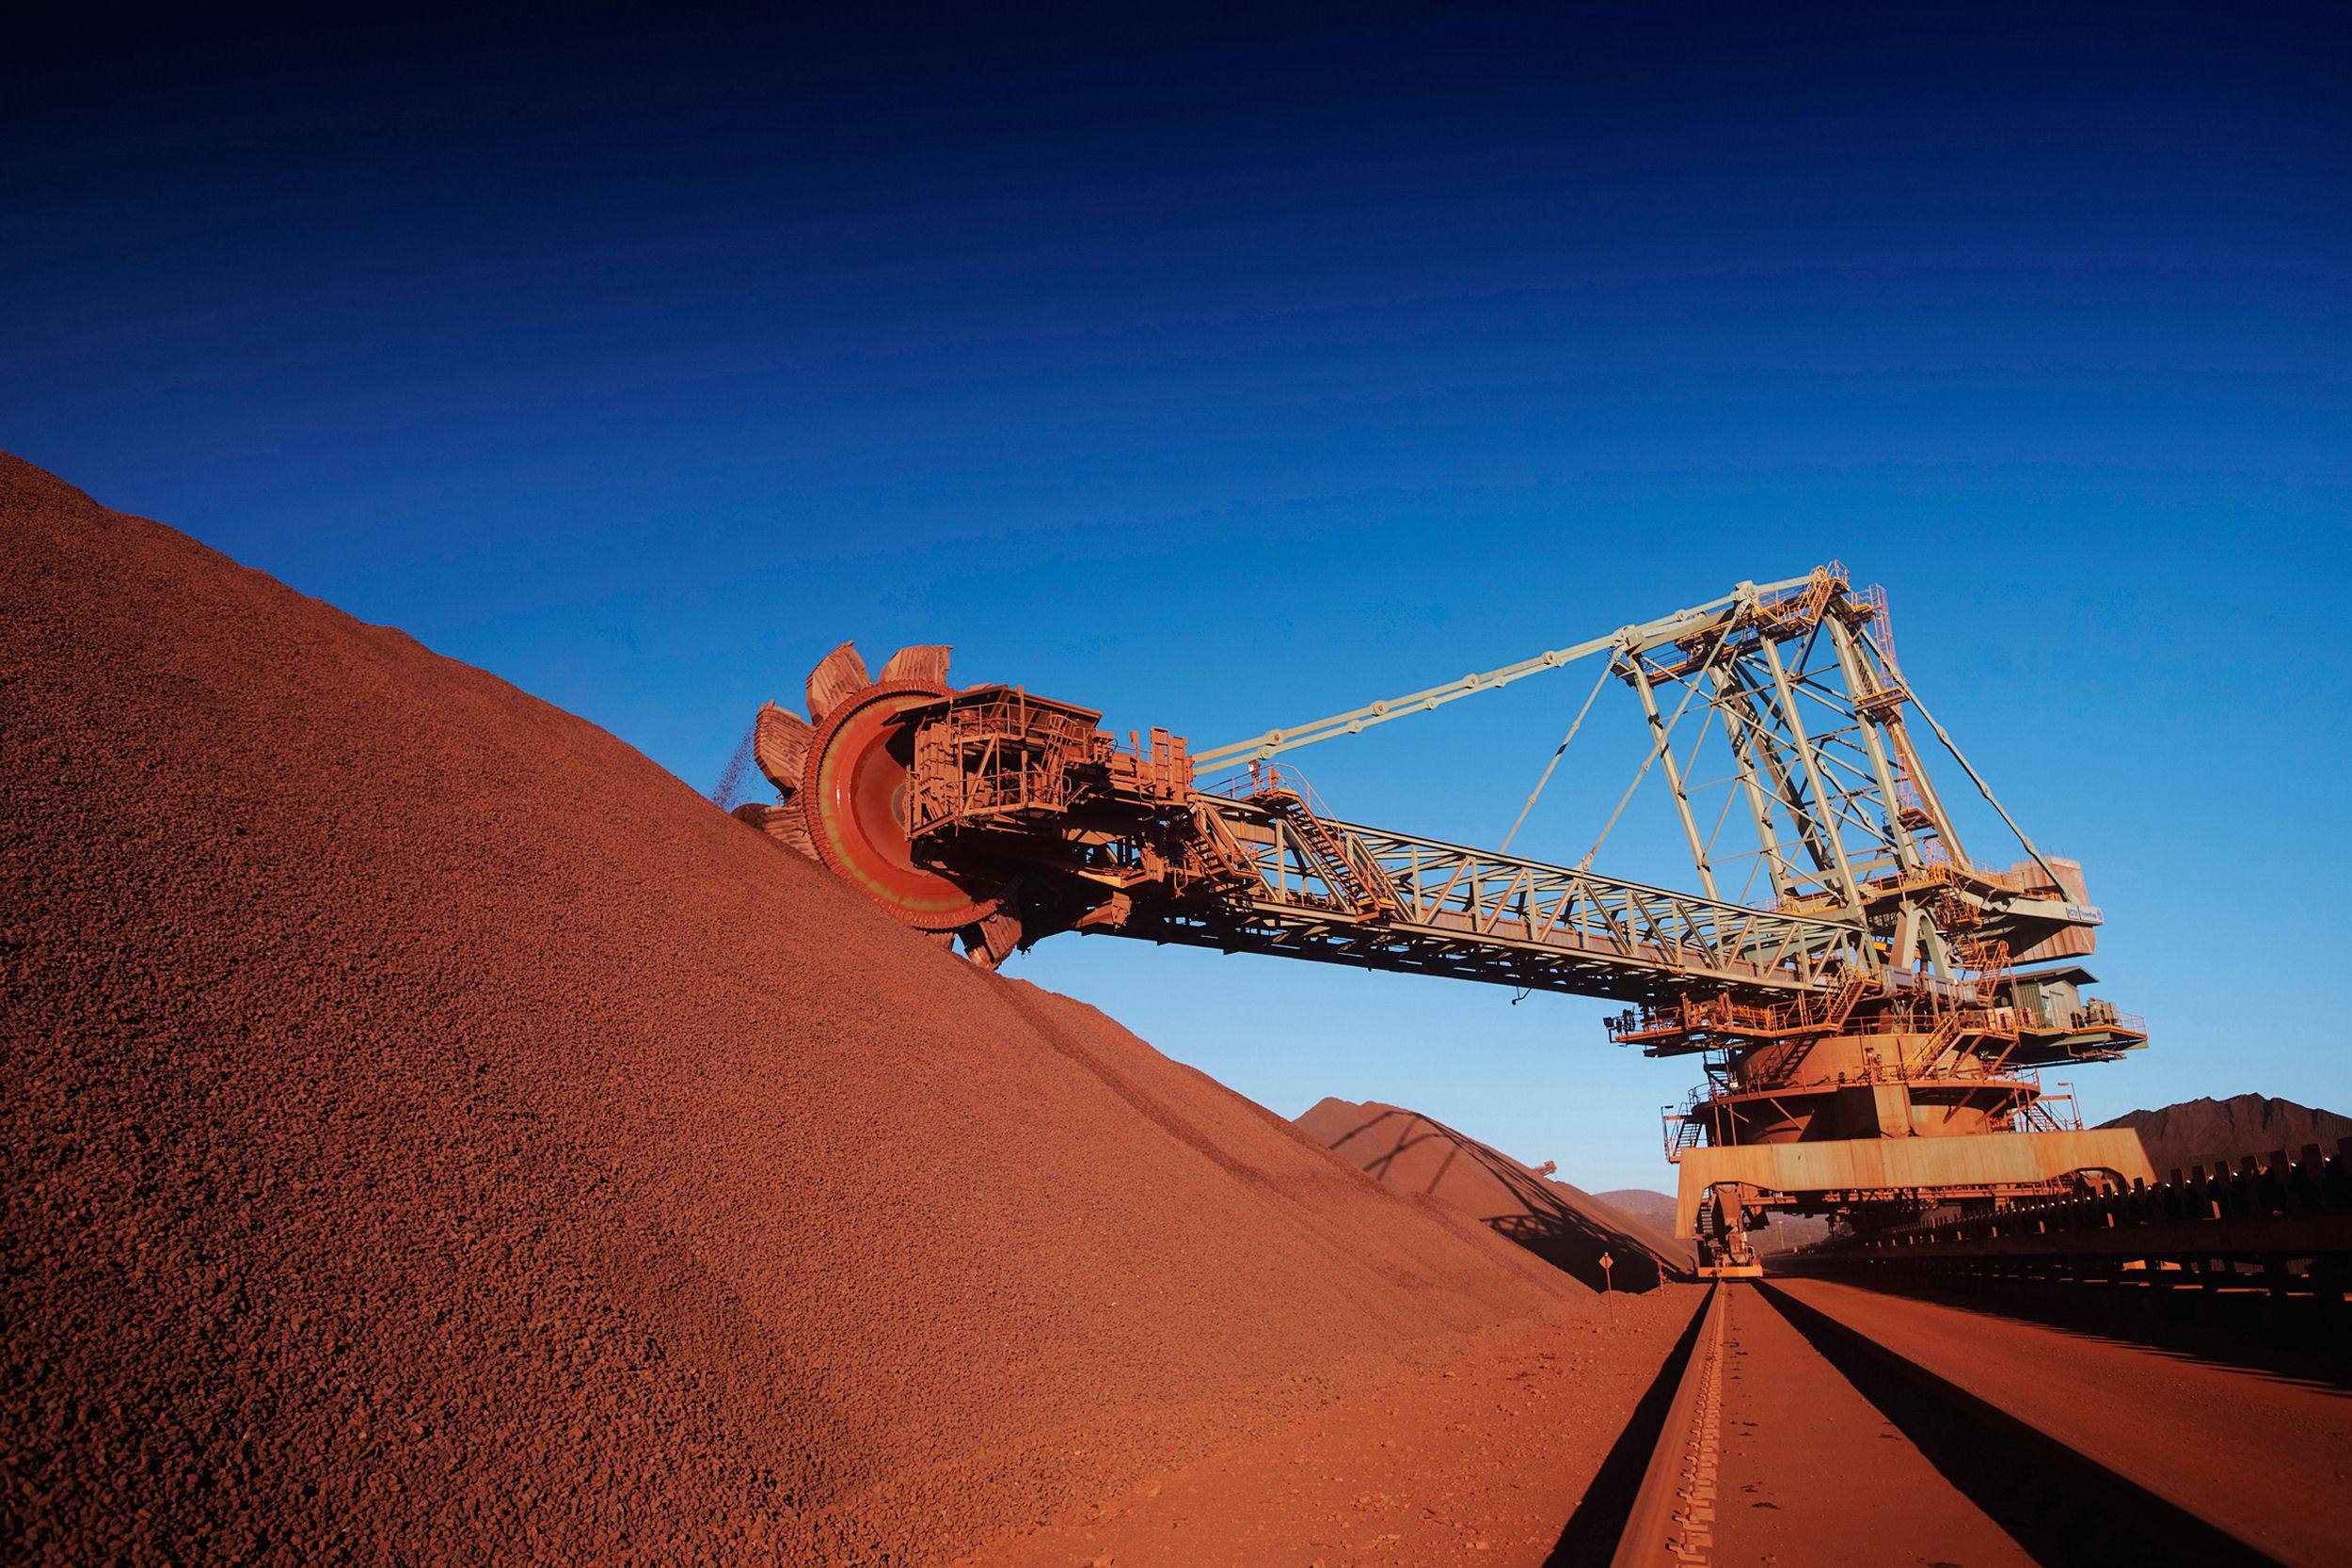 China imported just over one million tonnes of copper ore and concentrate from Australia in 2019, worth about US$1.67 billion at the time. Photo: AFP